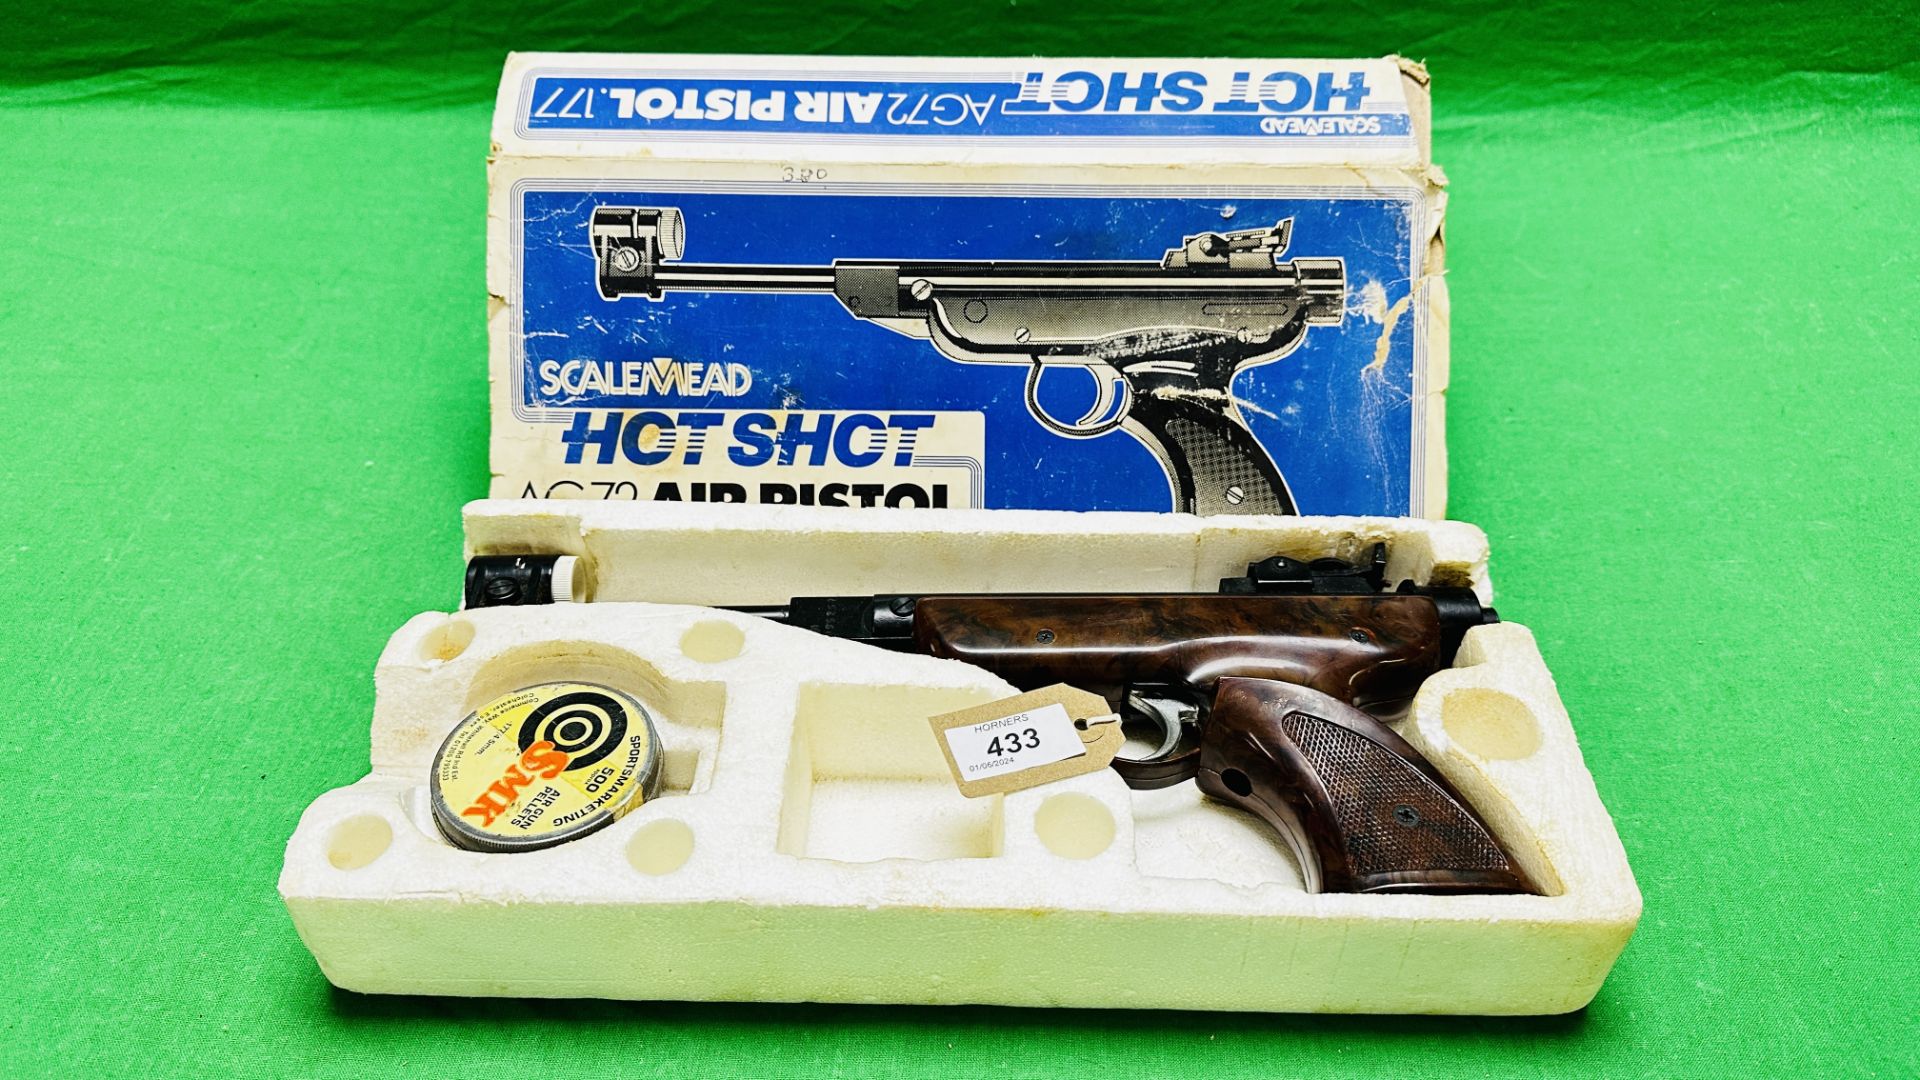 A BOXED SCALEMEAD HOT SHOT AG72 .